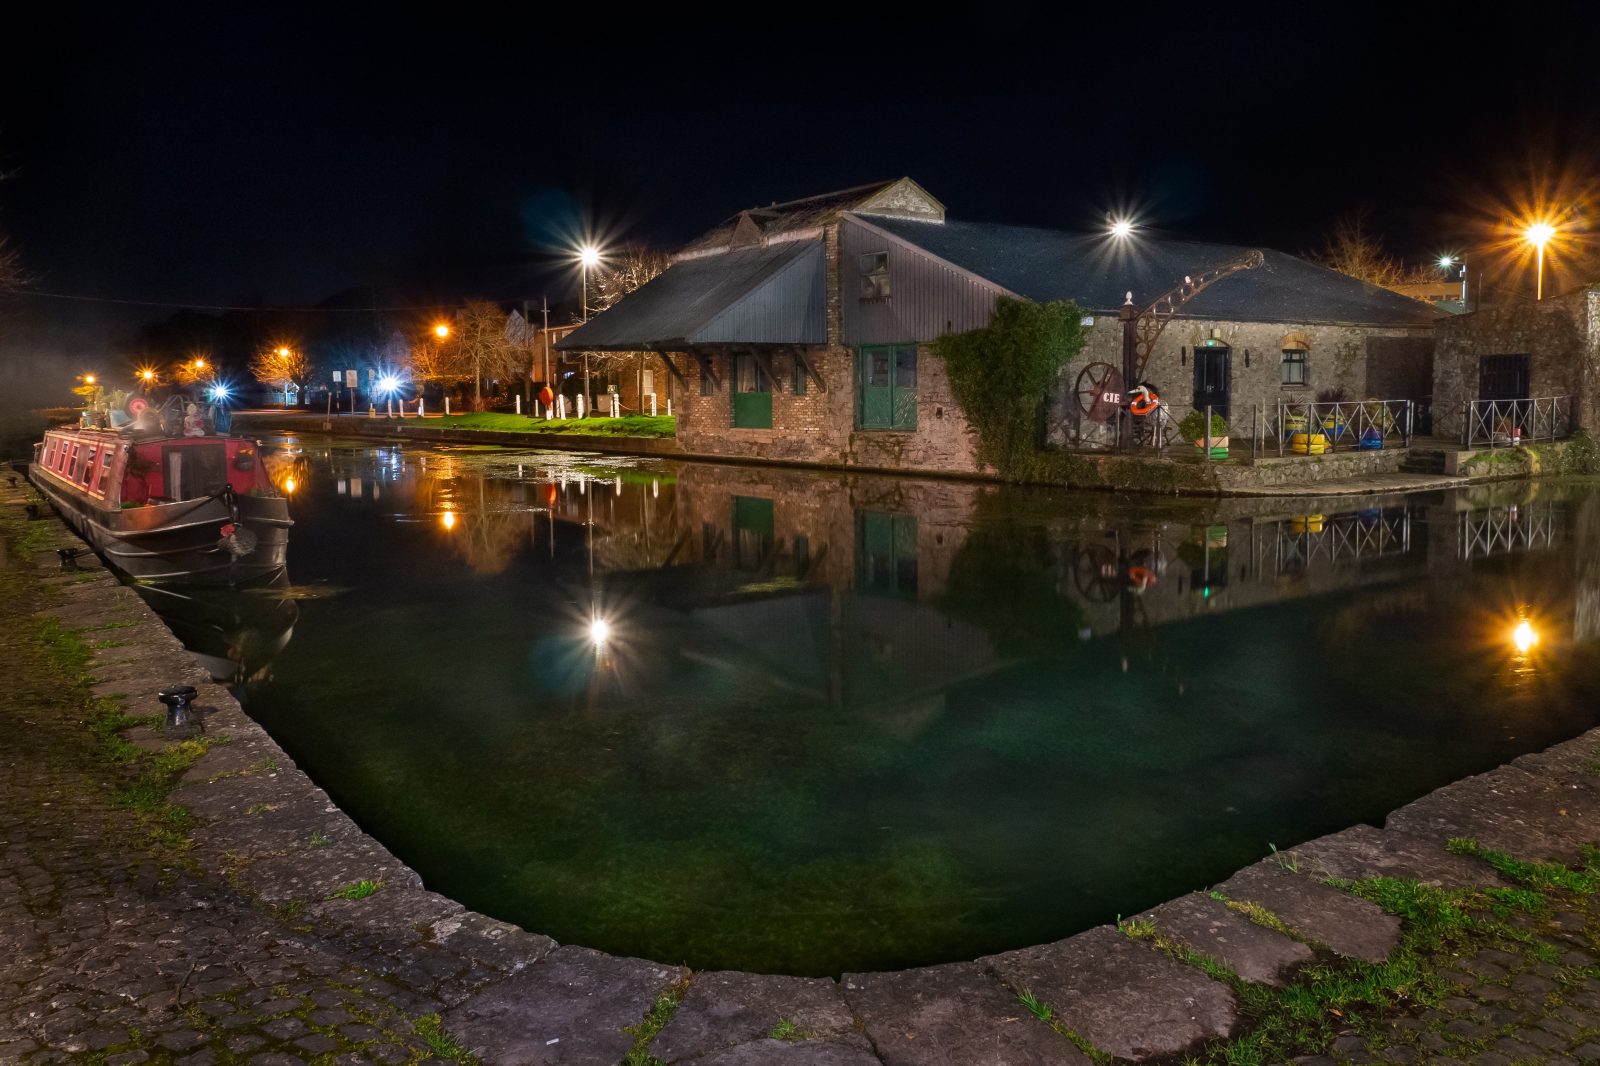 The Canal Harbour on Basin Street in Naas